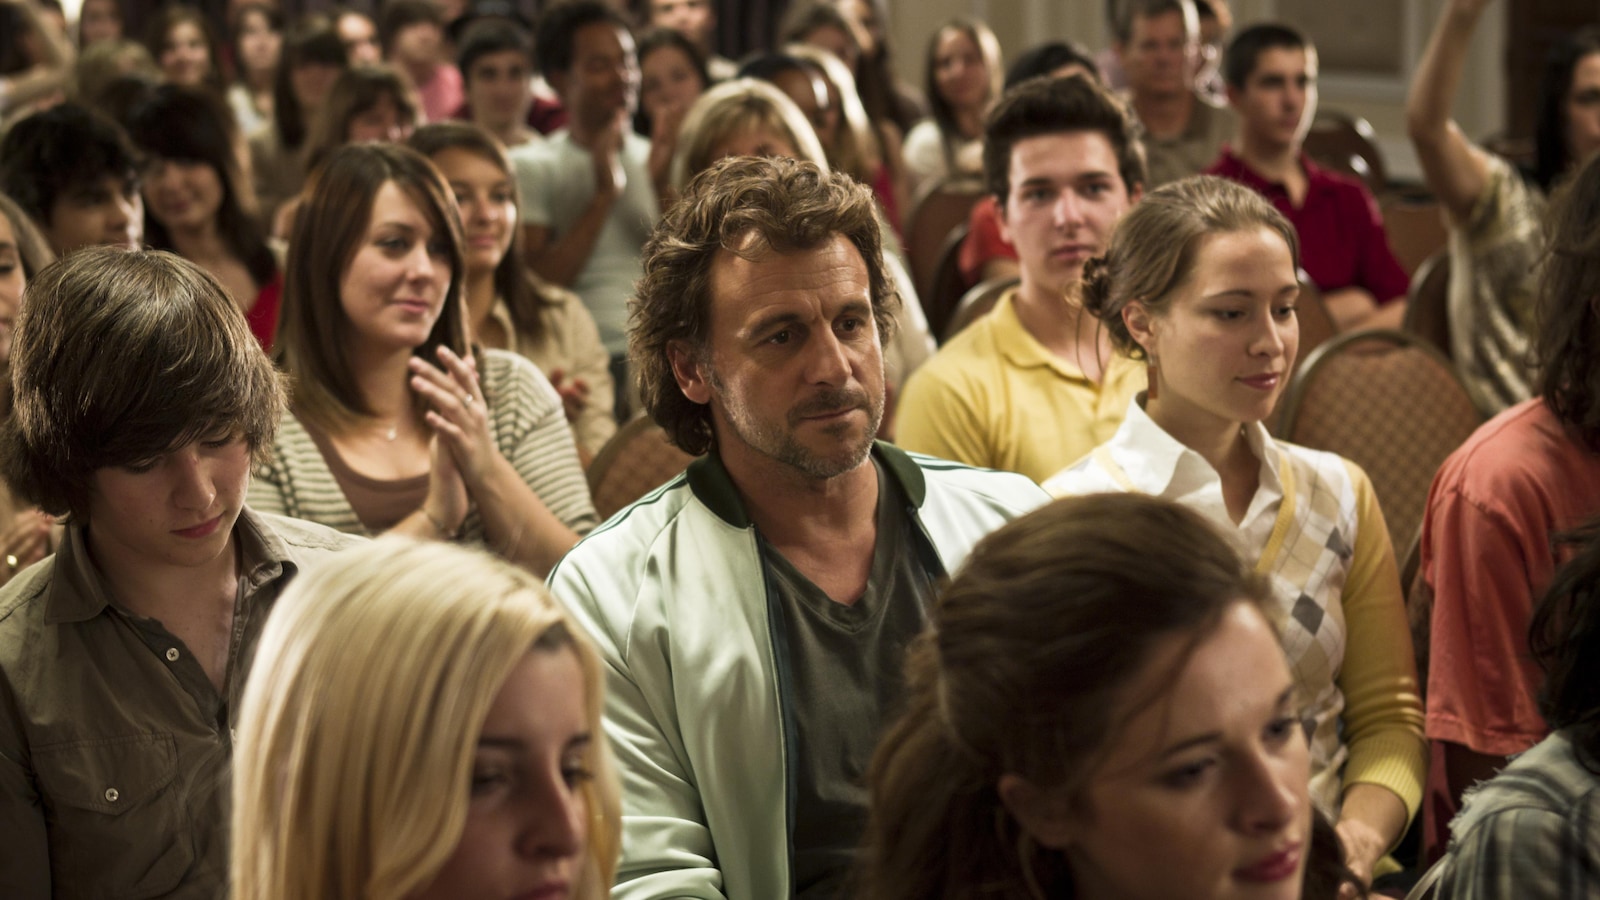 Patrick Howard plays Starbuck, sitting in the middle of a crowd